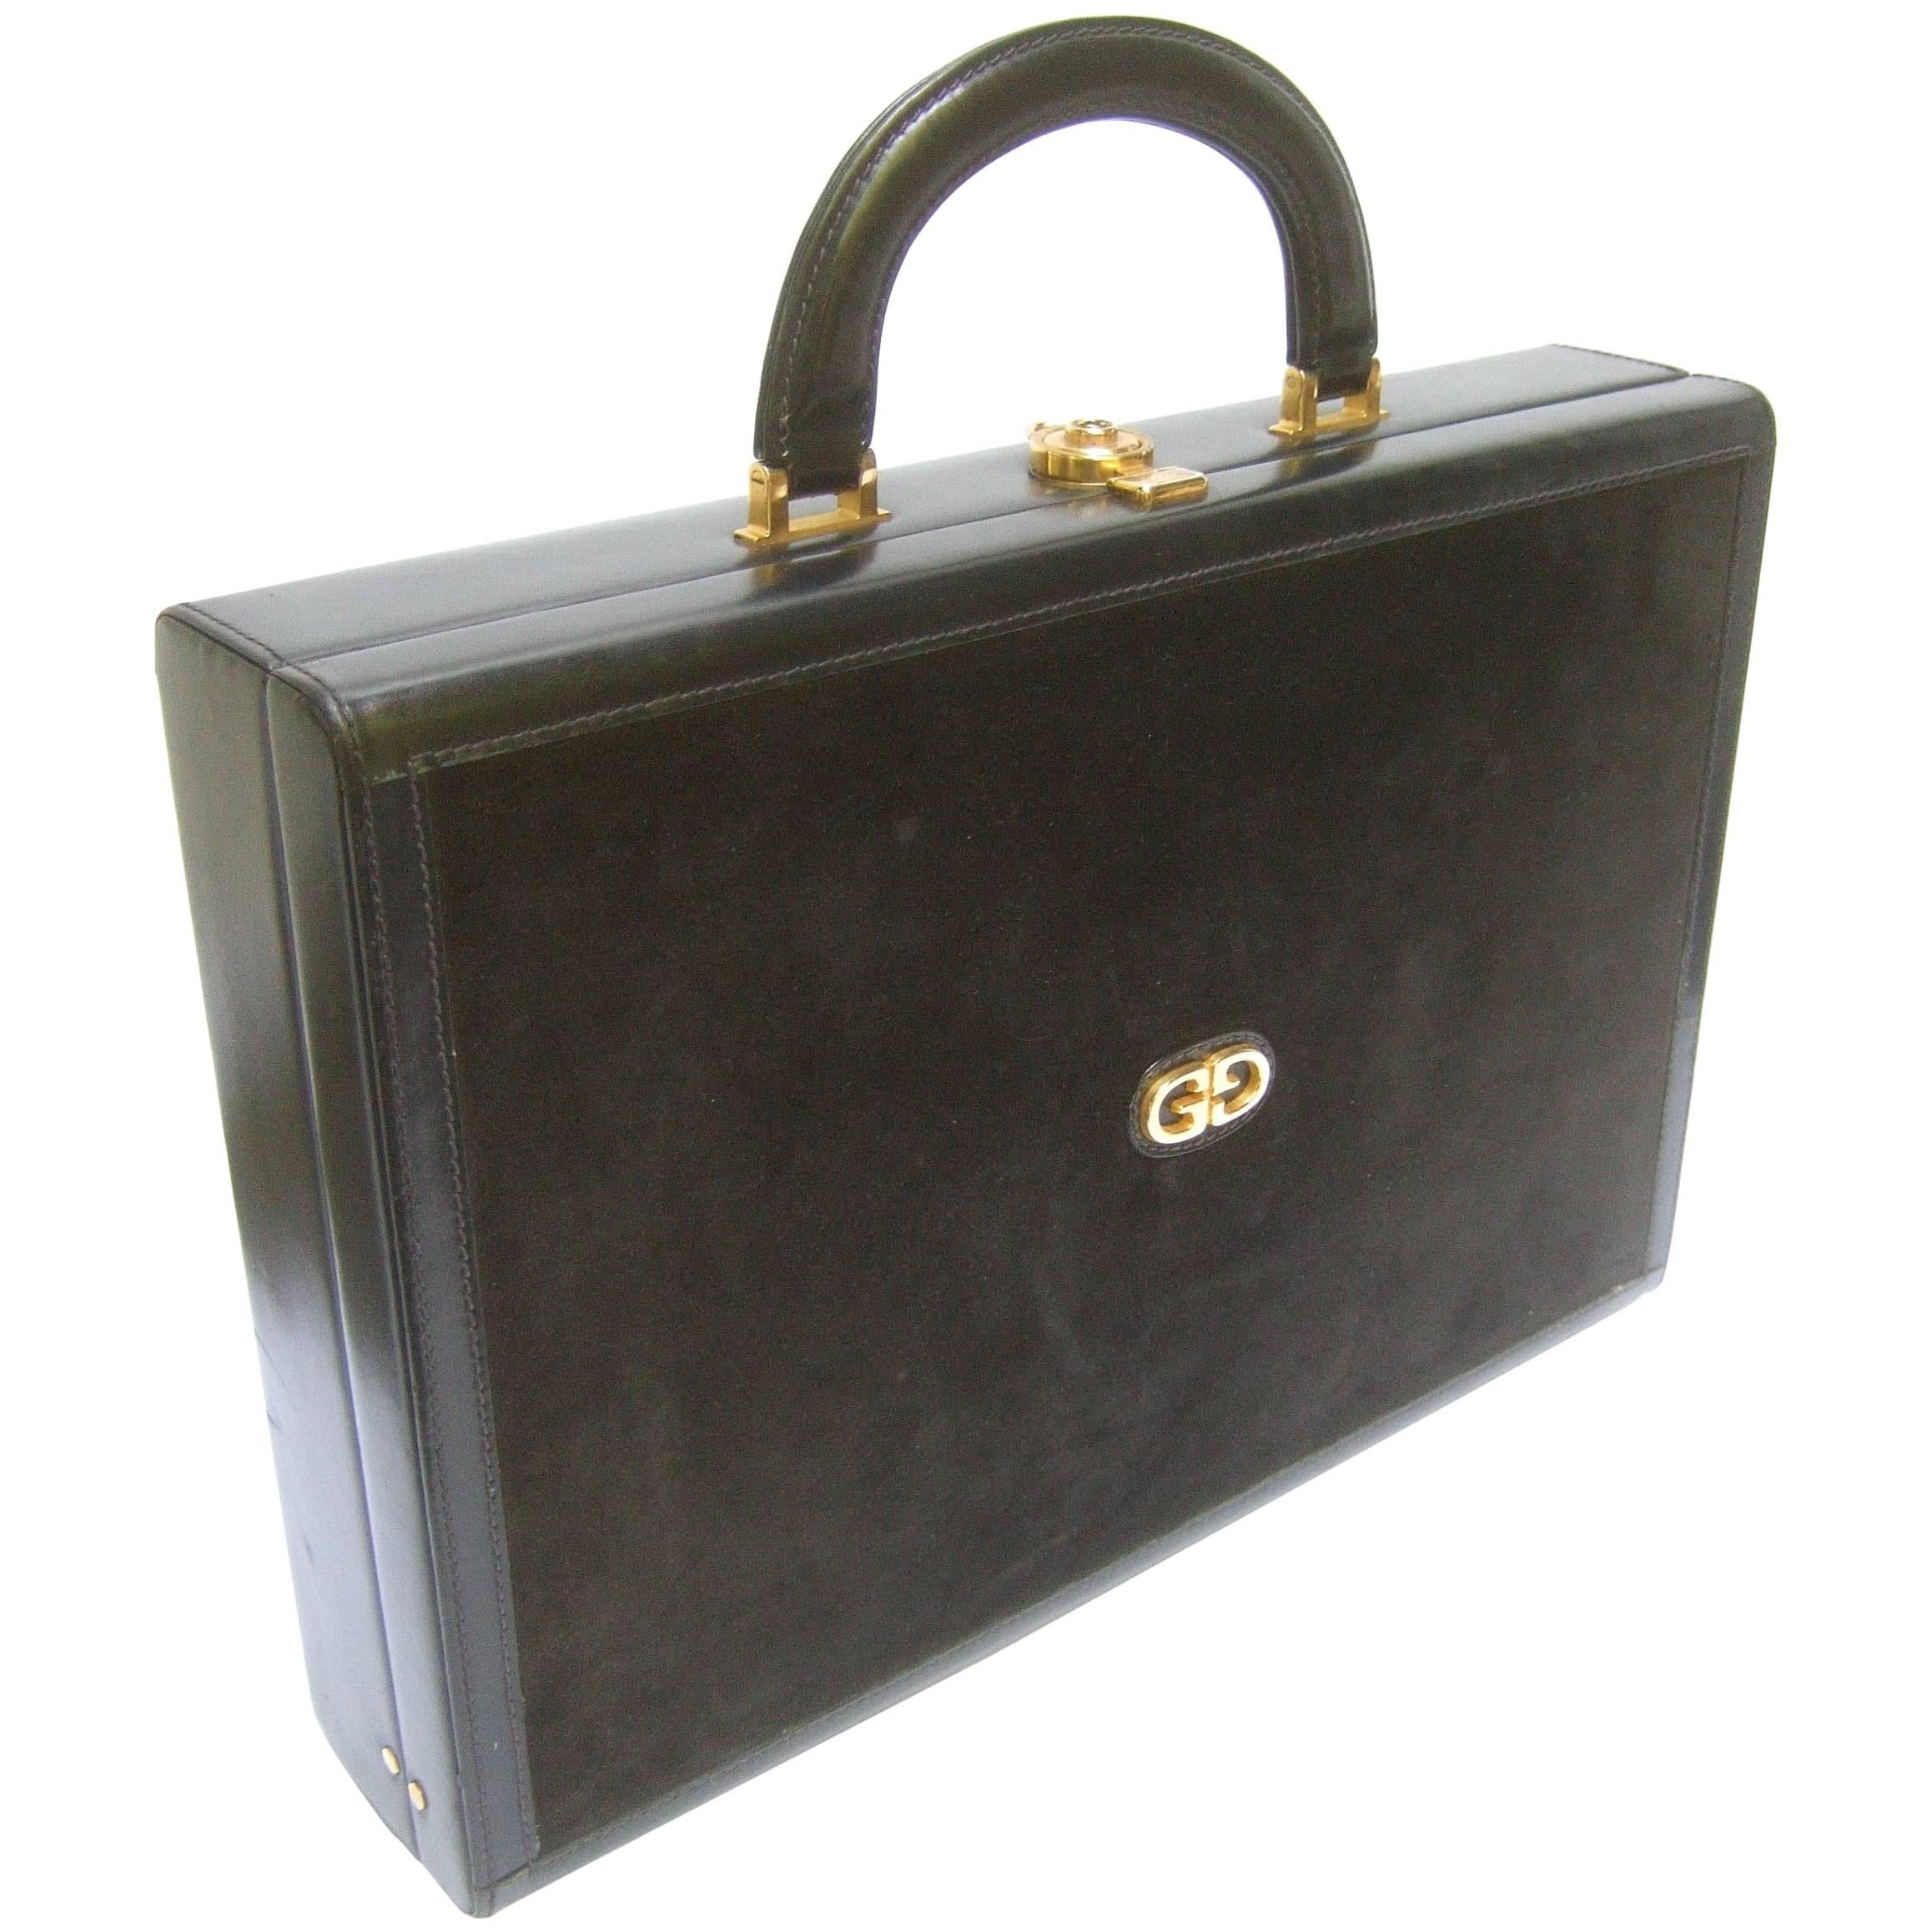 Gucci Luxurious Black Suede & Leather Briefcase circa 1970s